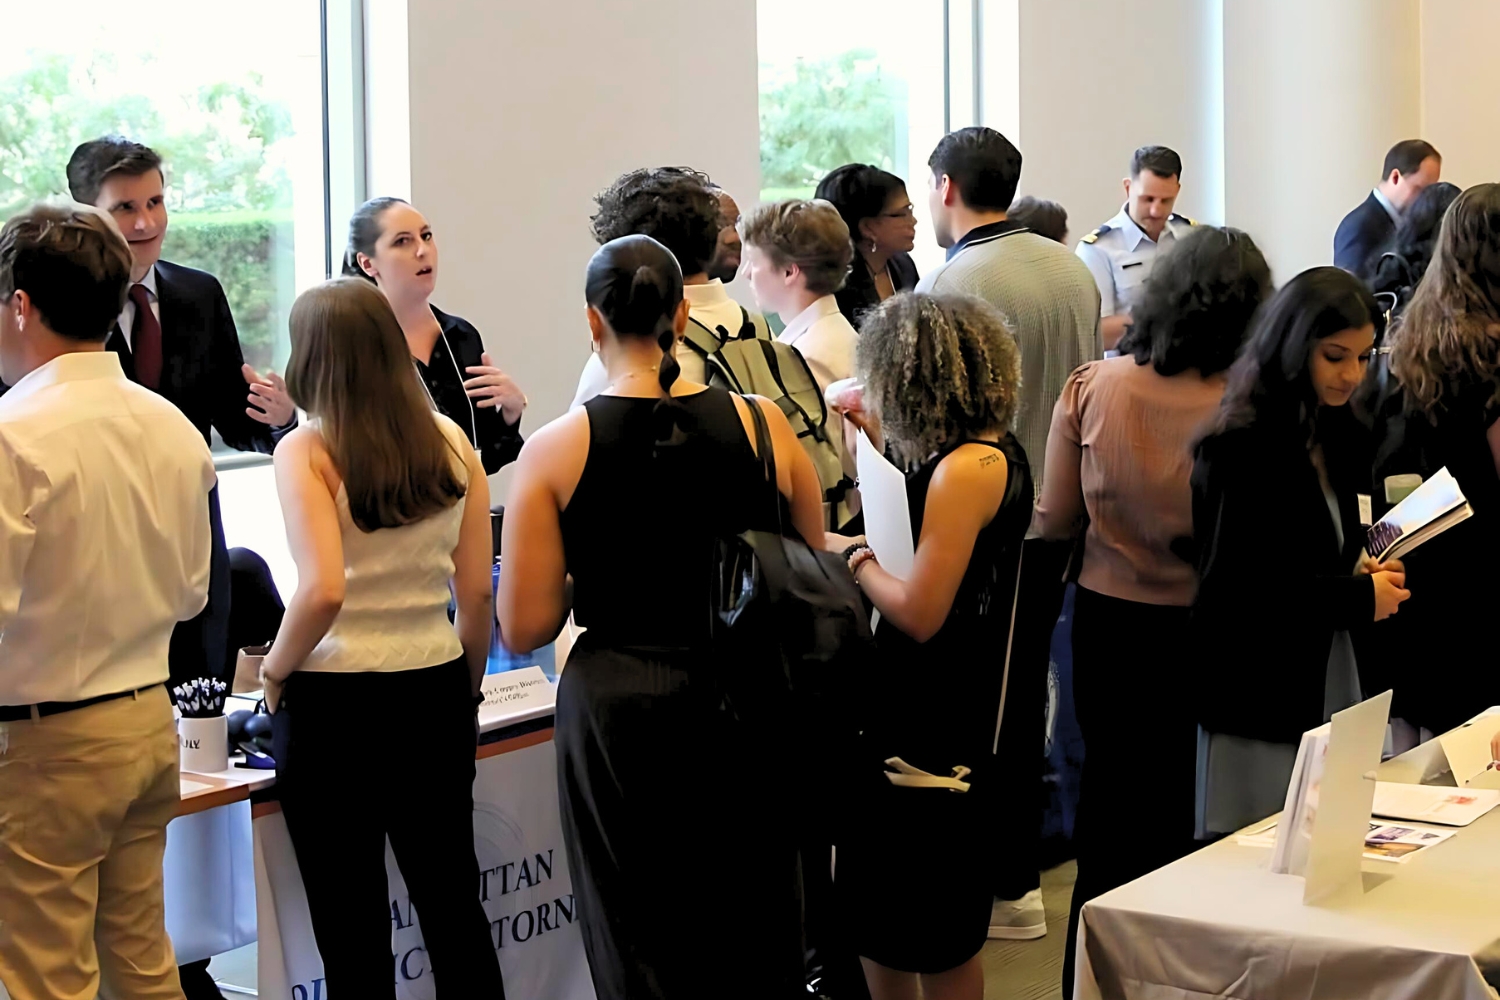 Professionals networking at a reception by window